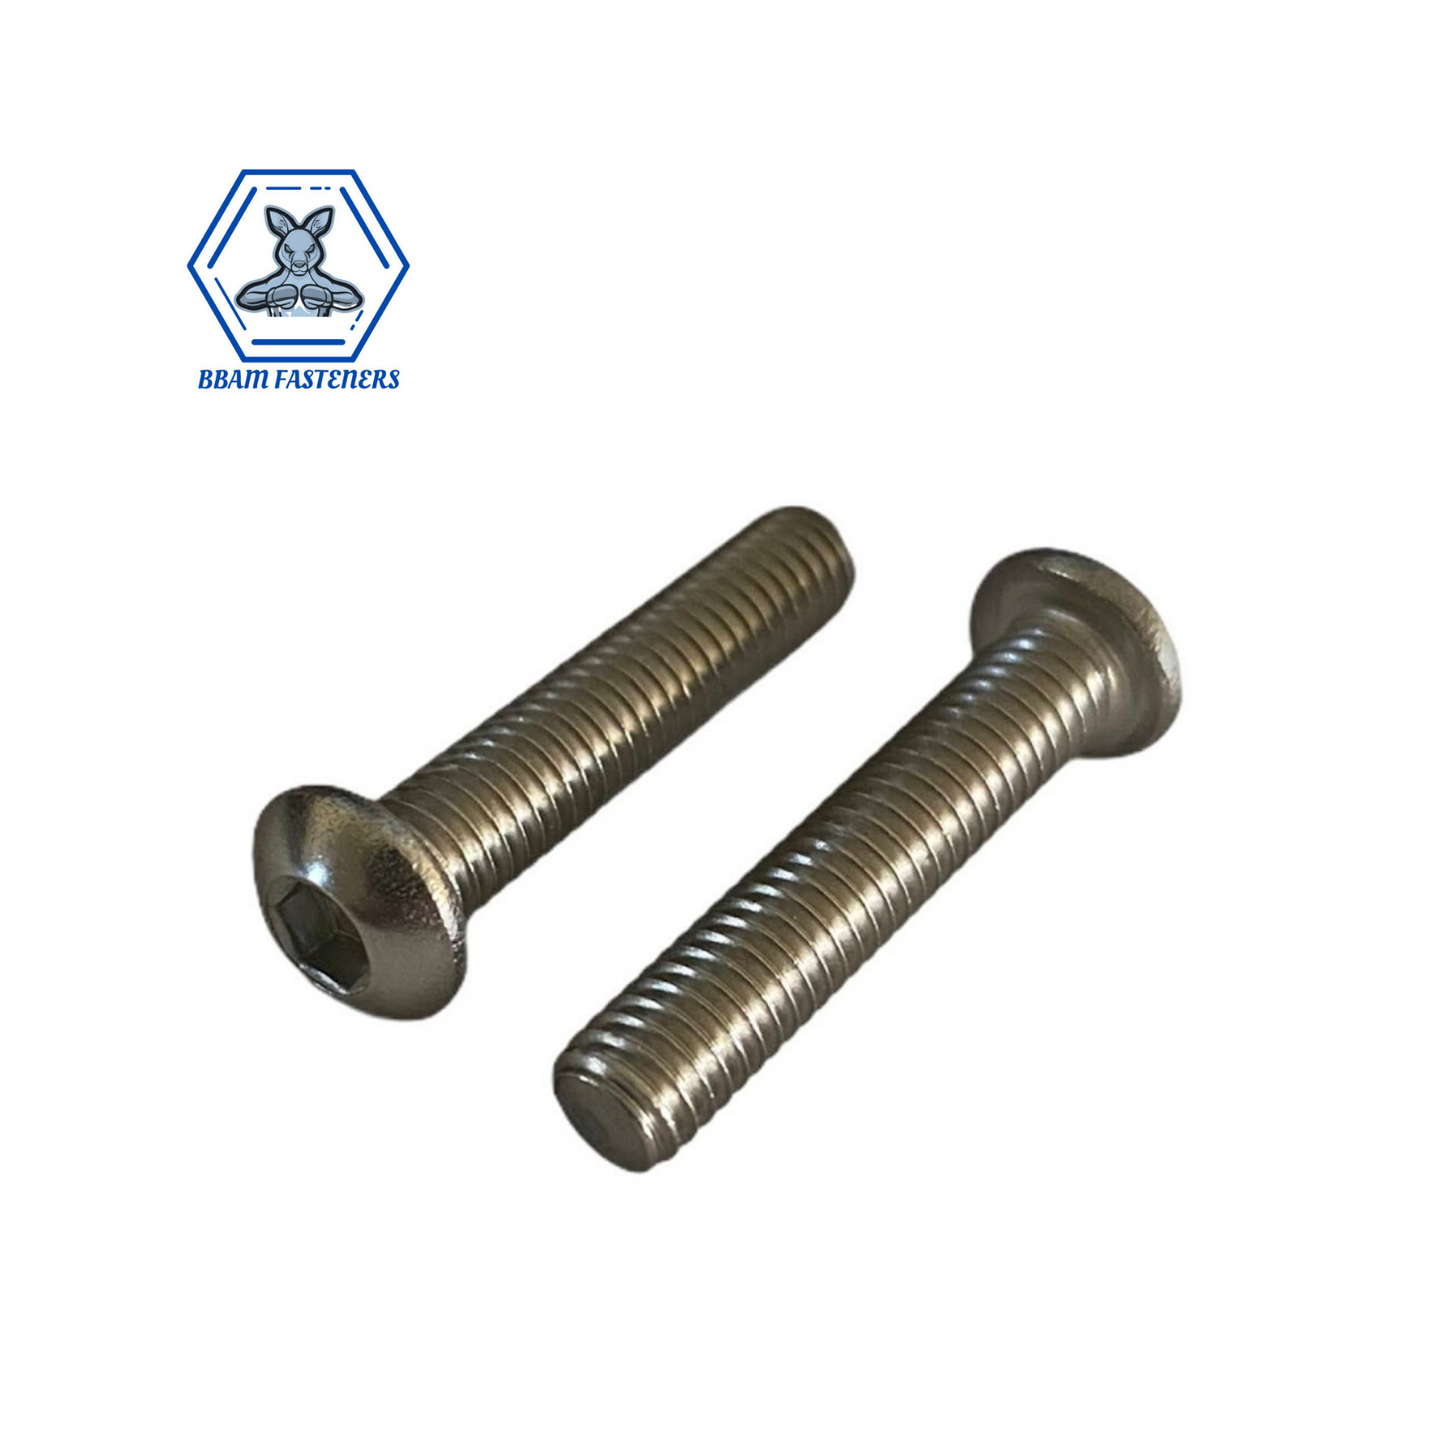 M3 x 10mm Button Socket Screw 316 Stainless Steel